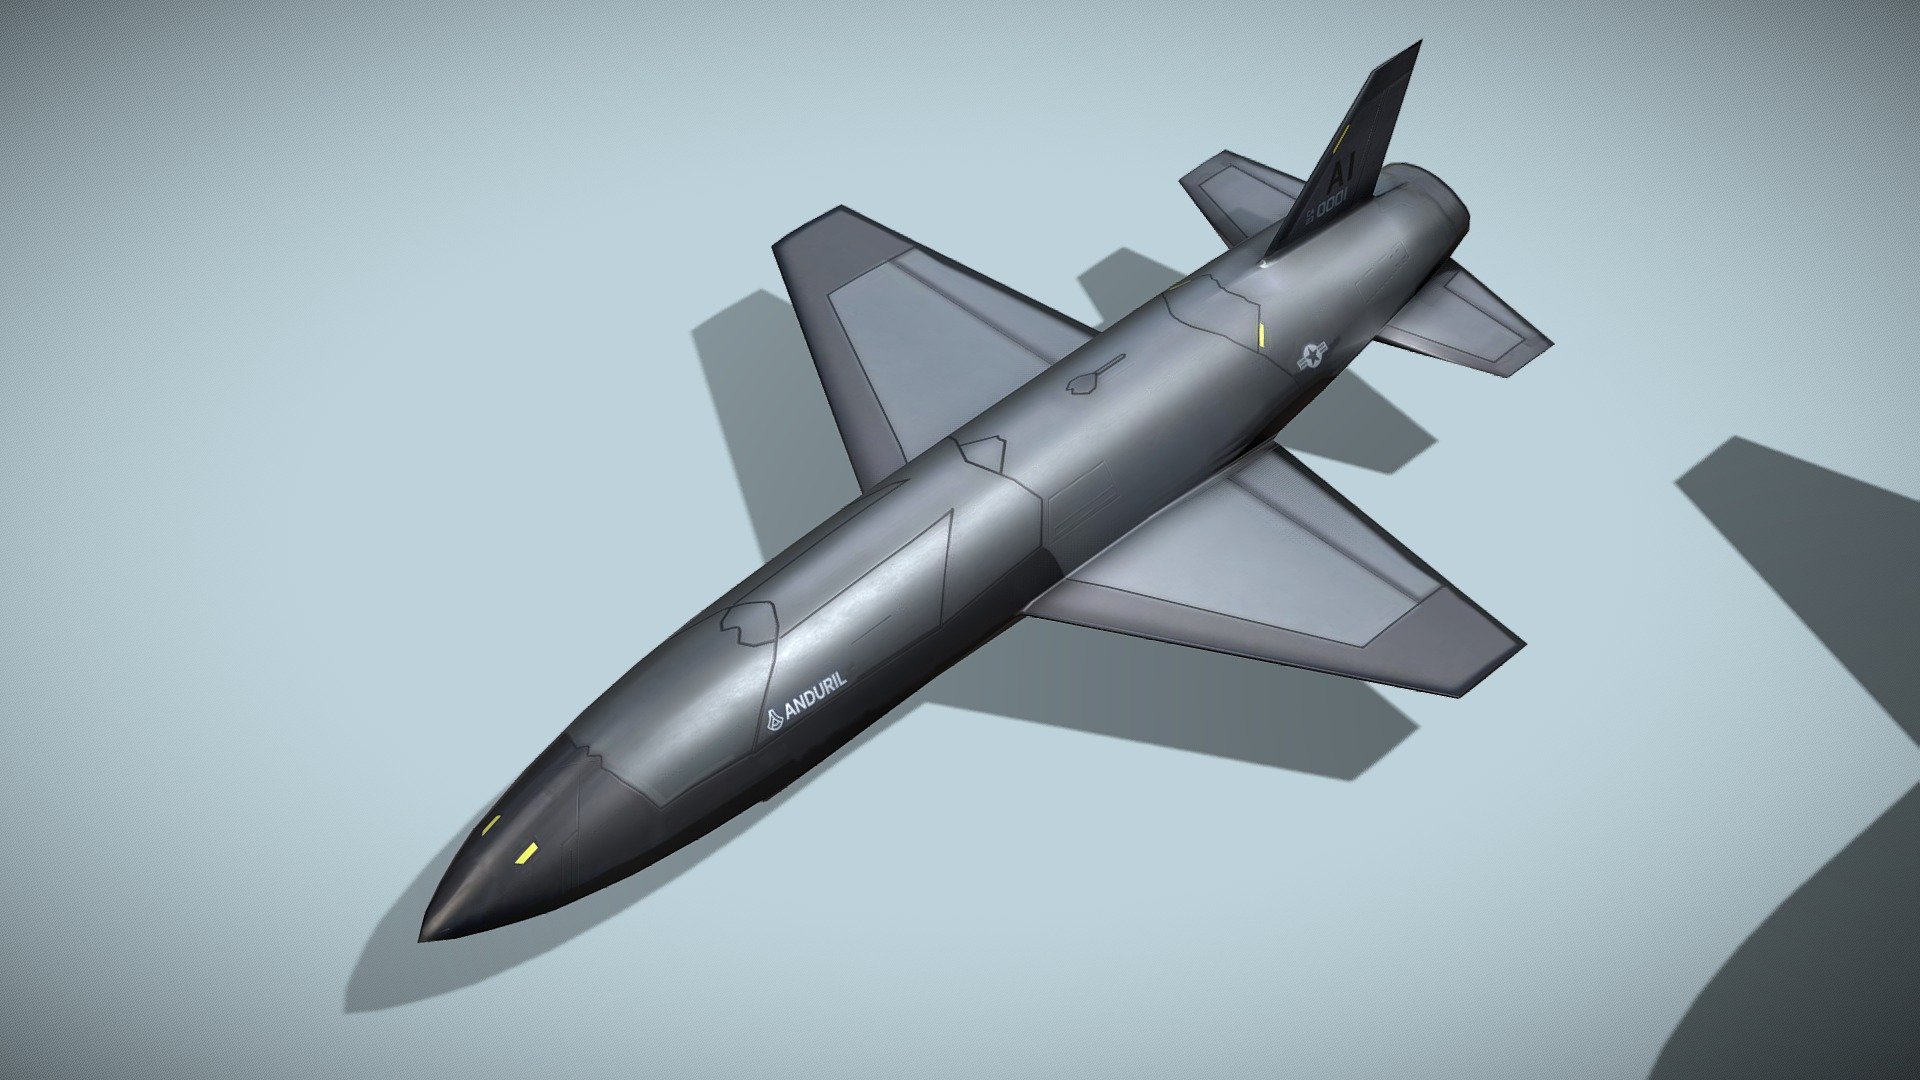 Anduril Fury

Lowpoly model of american drone jet



Anduril Industries, Inc. is an American defense company specializing in autonomous systems. Anduril's strategy includes providing the U.S. Department of Defense with technology that Silicon Valley firms have eschewed due to their controversial military applications, including artificial Intelligence and robotics. 

Originally developed and manufactured by Blue Force Technologies, which Anduril acquired in 2023, Fury is a long-range drone with 17-foot wingspan capable of sub-sonic speeds suited for surveillance and combat operations.



Standing version and flying with separate color schemes

Fully rigged

Model has bump map, roughness map , metalness and 2 x diffuse textures.



Check also my other aircrafts and cars.

Patreon with monthly free model - Anduril Fury drone - Buy Royalty Free 3D model by NETRUNNER_pl 3d model